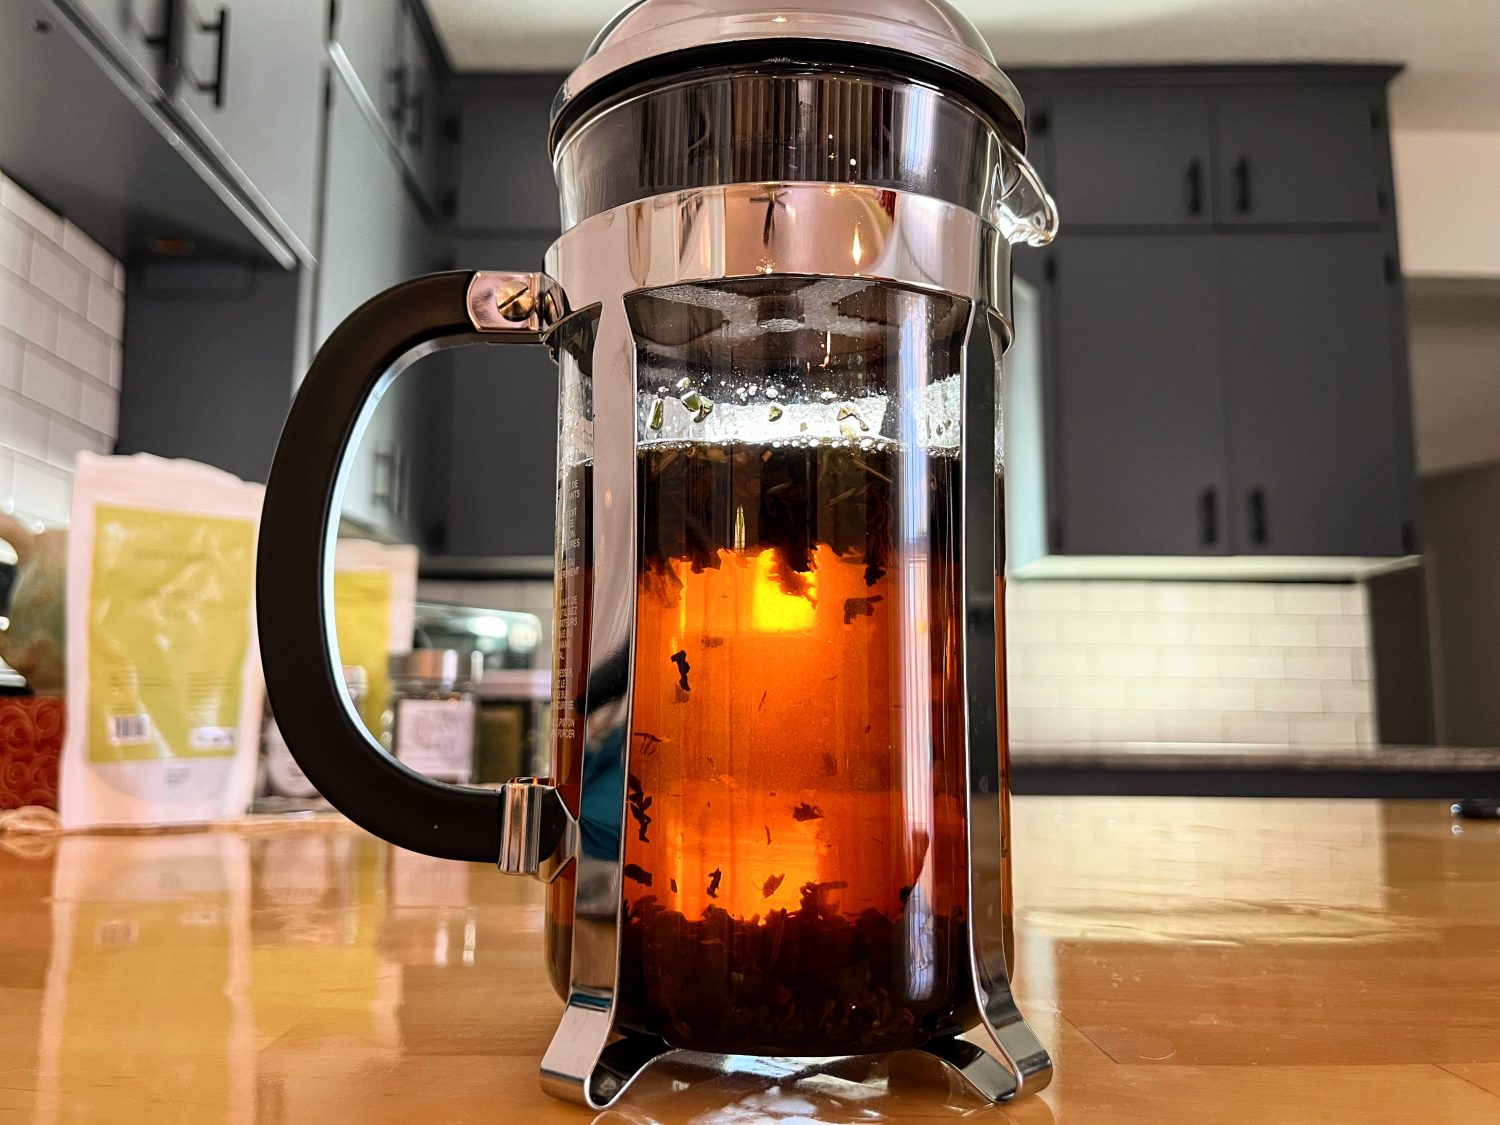 close-up-tea-brewing-in-french-press